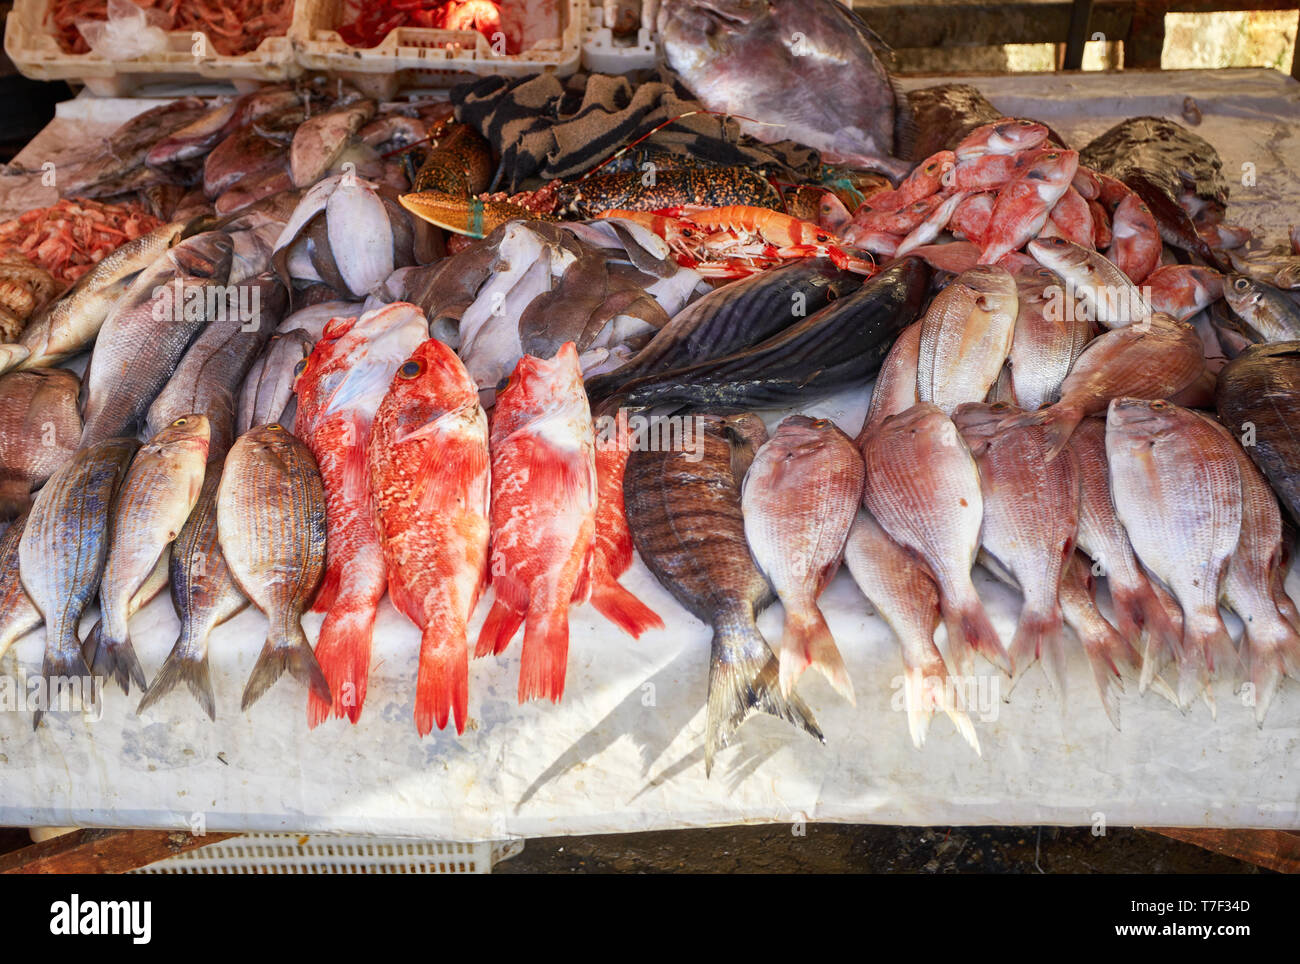 Real fish market and fresh fish, seafood from Atlantic ocean in